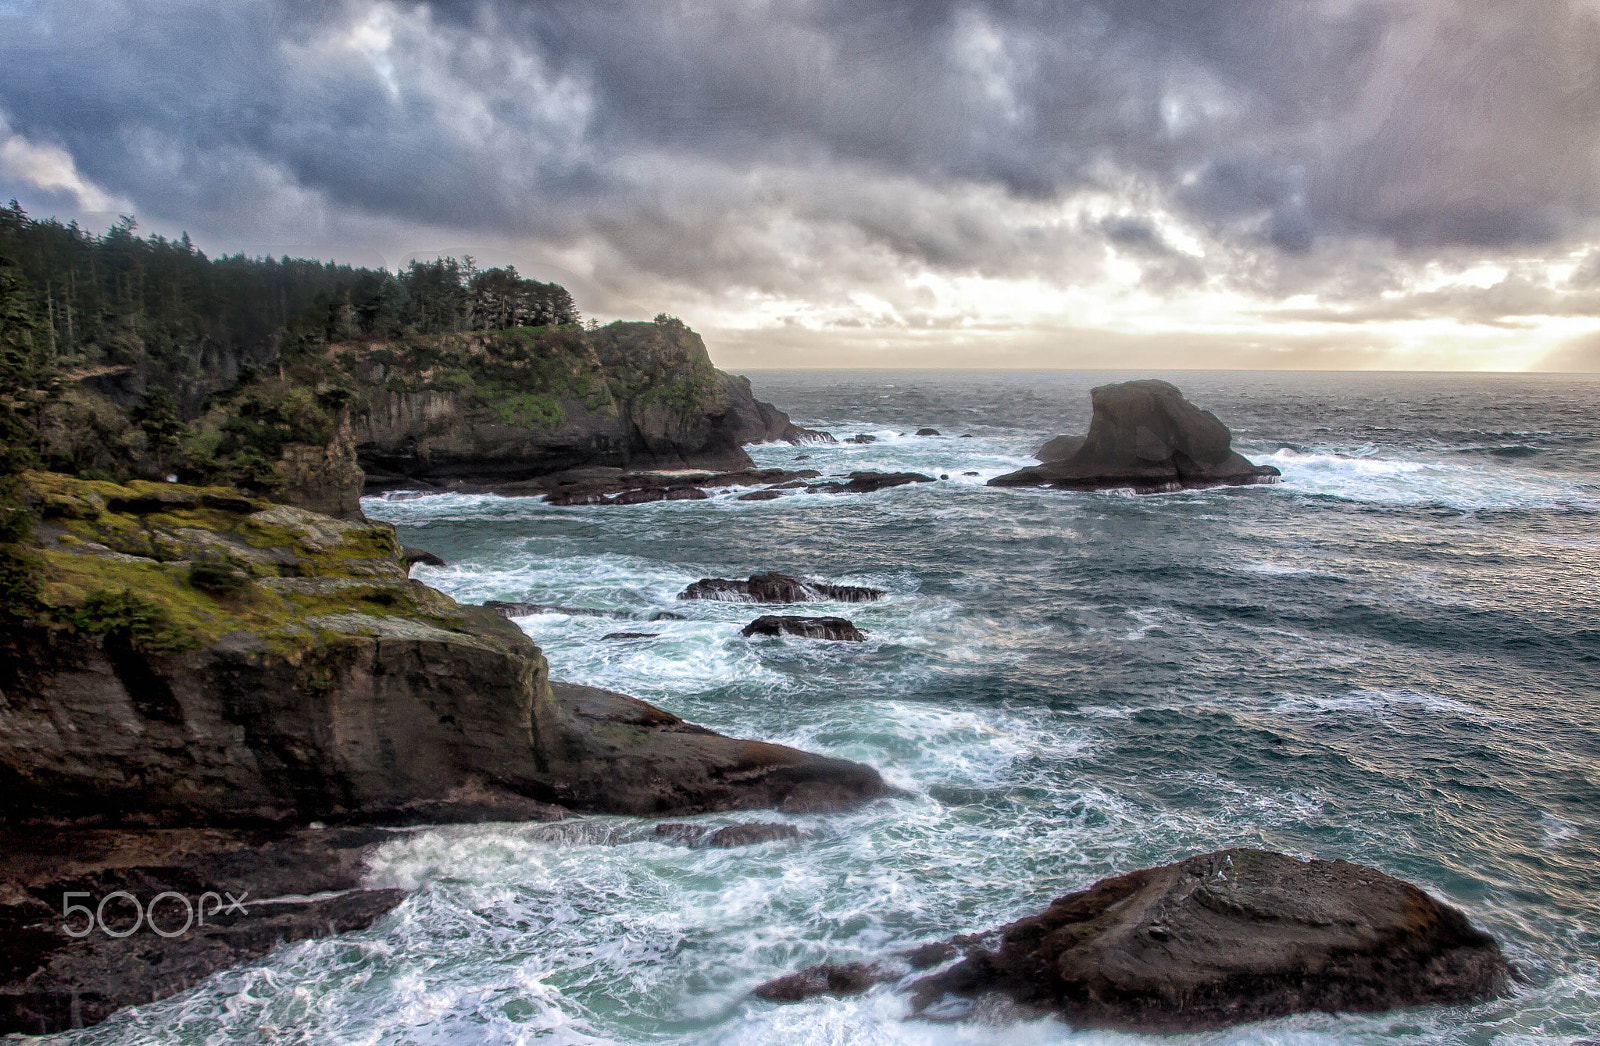 Olympus E-520 (EVOLT E-520) sample photo. Looking south from cape flattery photography